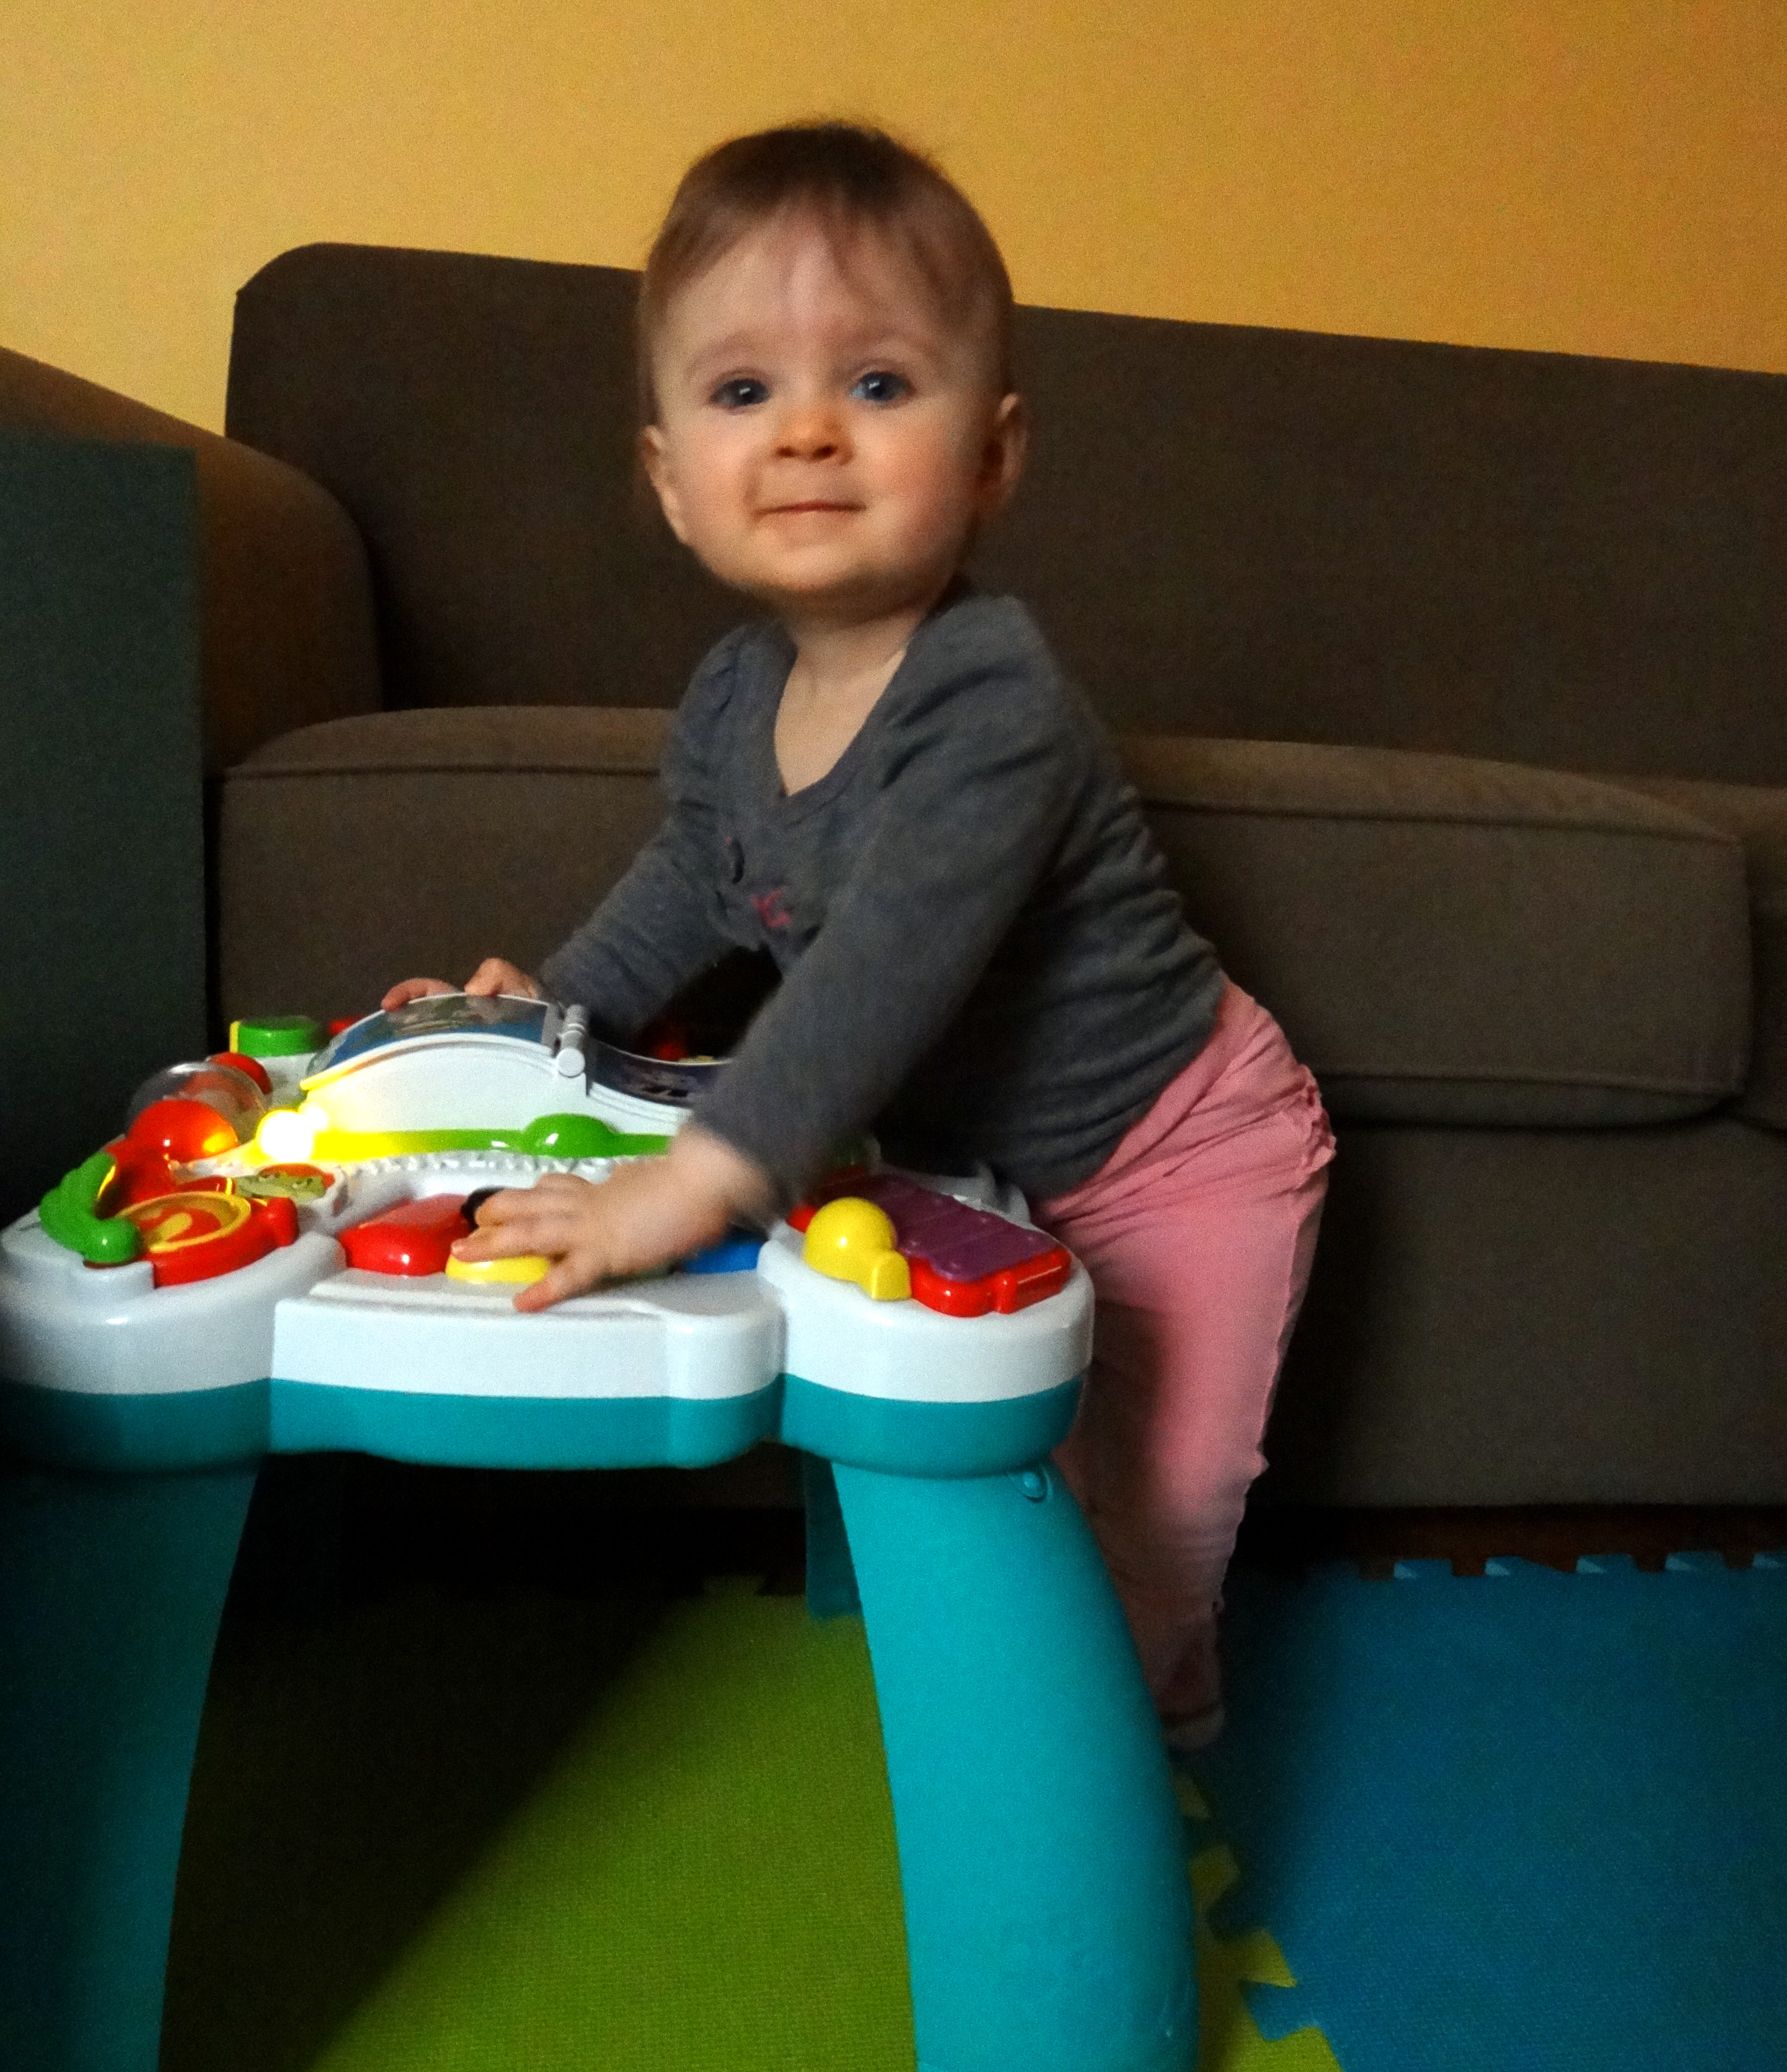 Baby standing at a play table